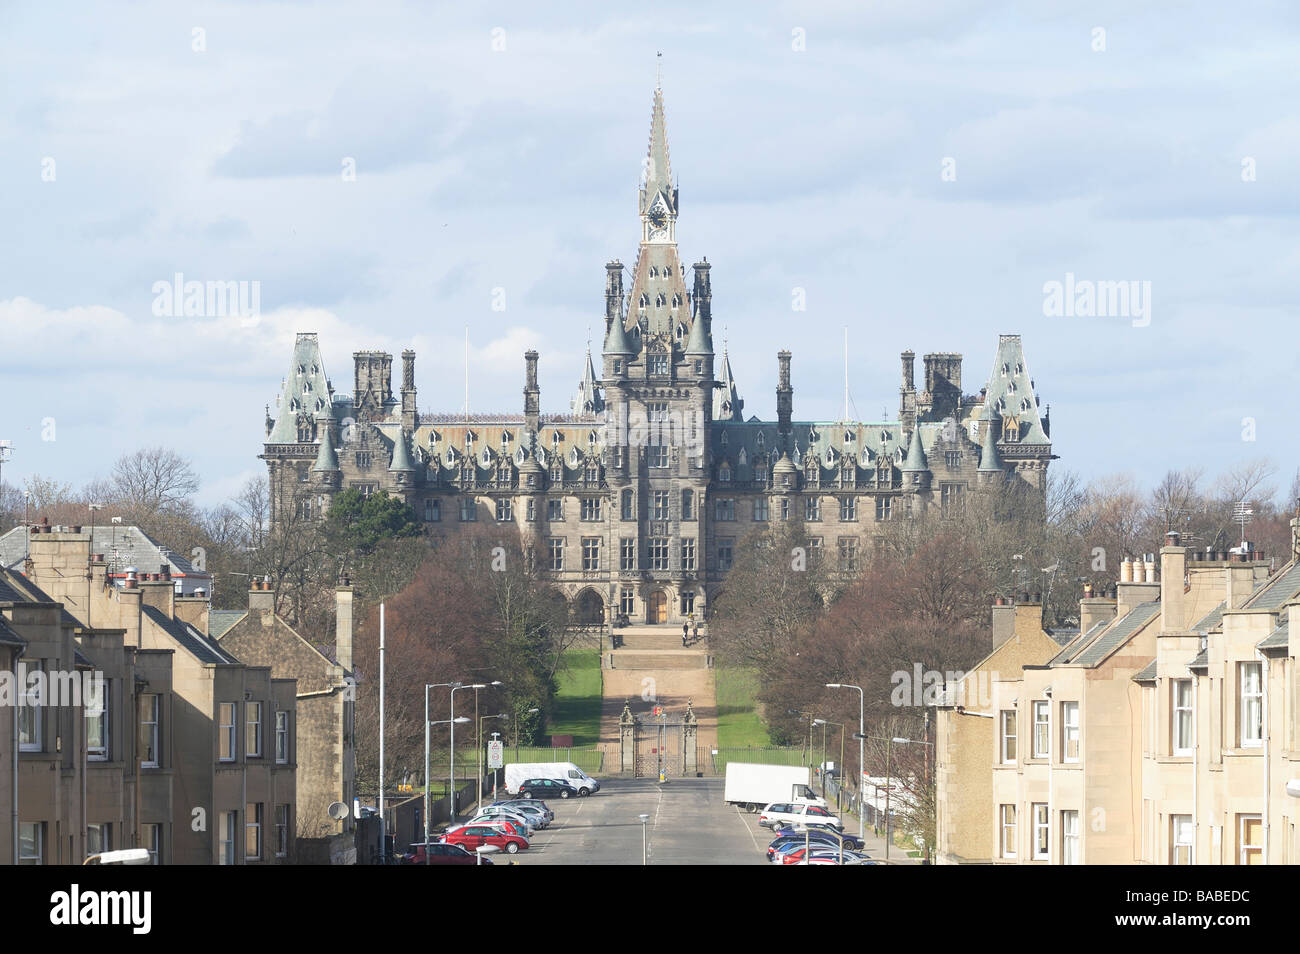 Fettes College is an independent boarding and day school in Edinburgh, Scotland. Former Prime Minister Tony Blair is an Alumni. Stock Photo